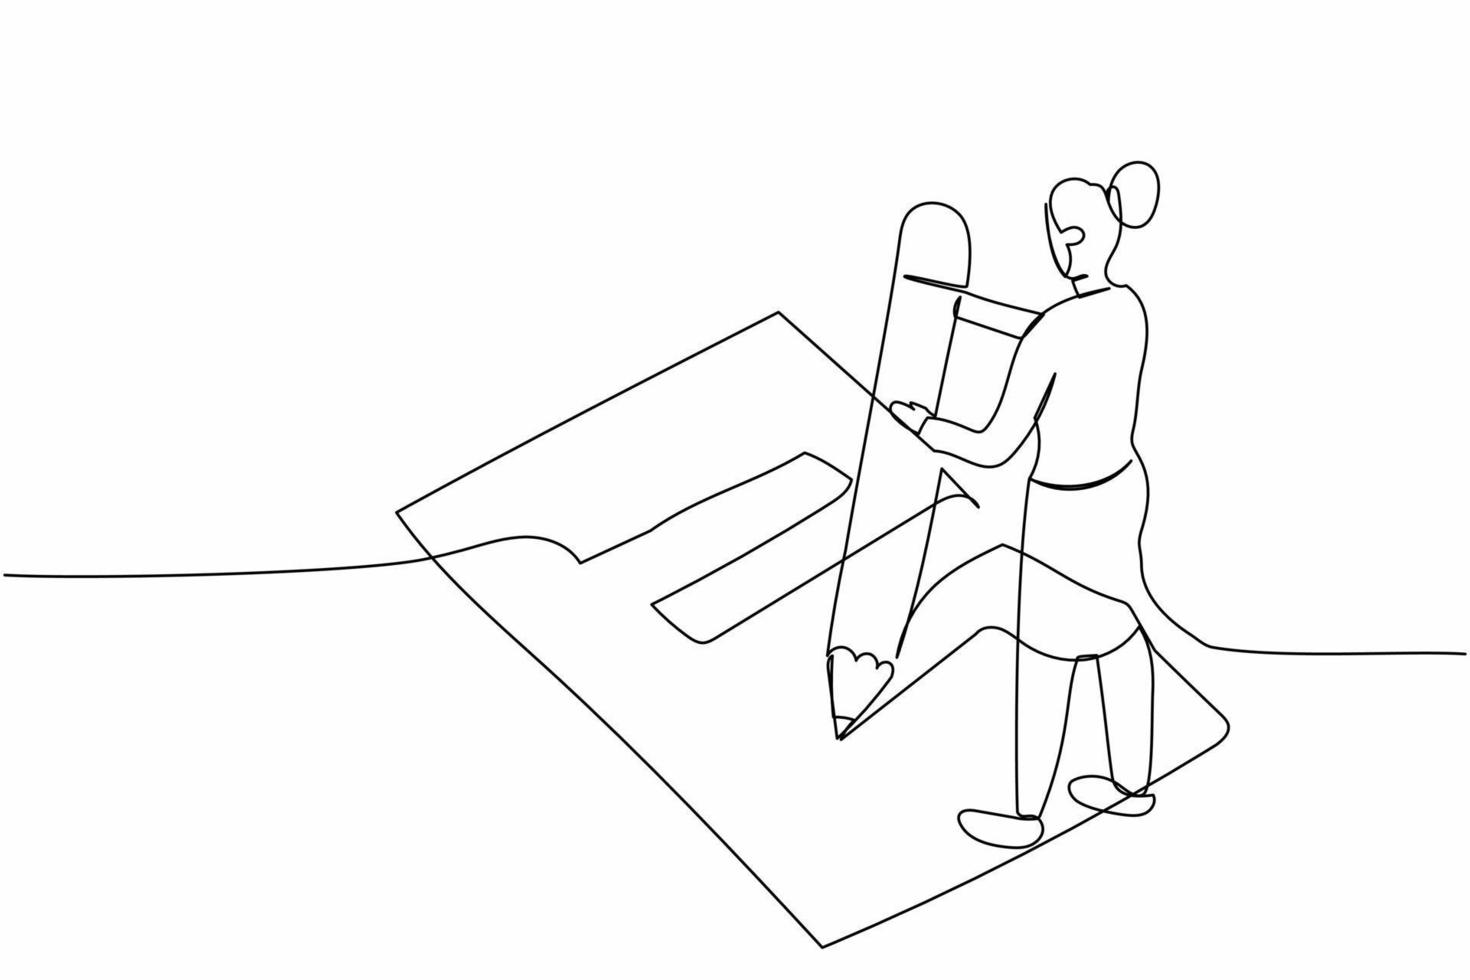 Continuous one line drawing businesswoman filled out questionnaire on the floor. Worker writes test on clipboard with giant pencil. Standing near checklist. Single line draw design vector illustration